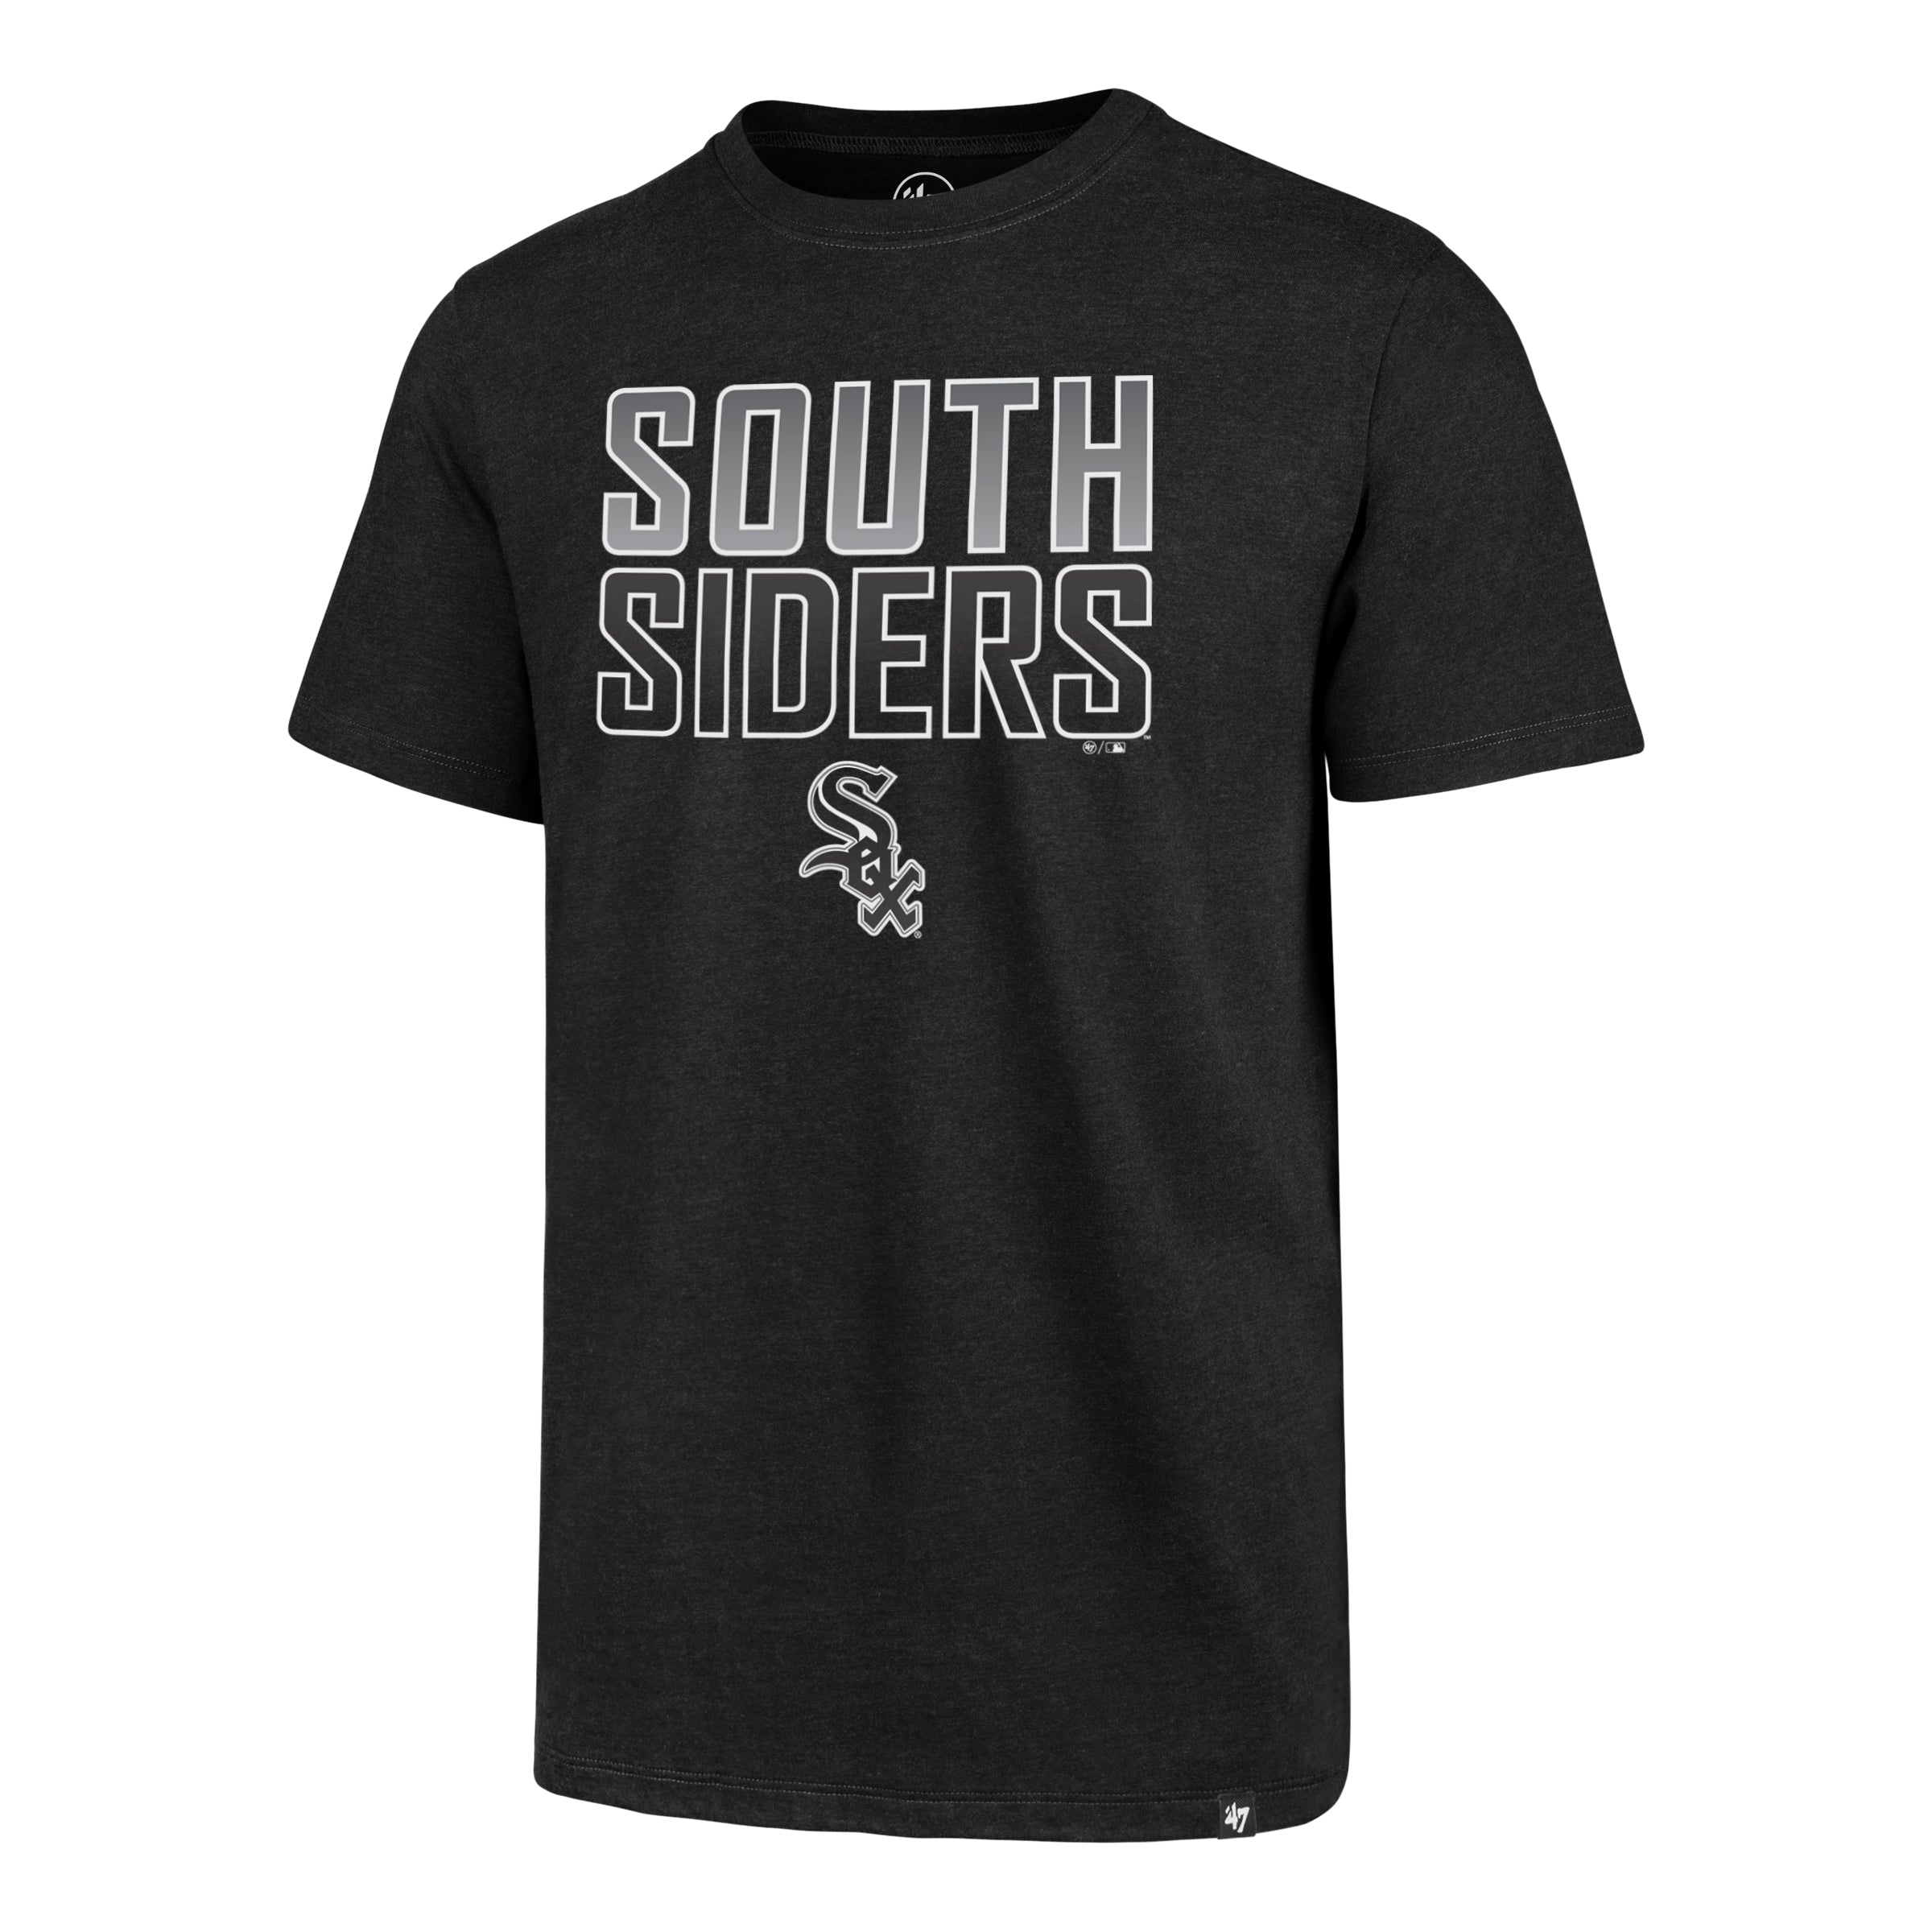 Chicago White Sox Shirt, South Siders Chicago White Sox Shirt